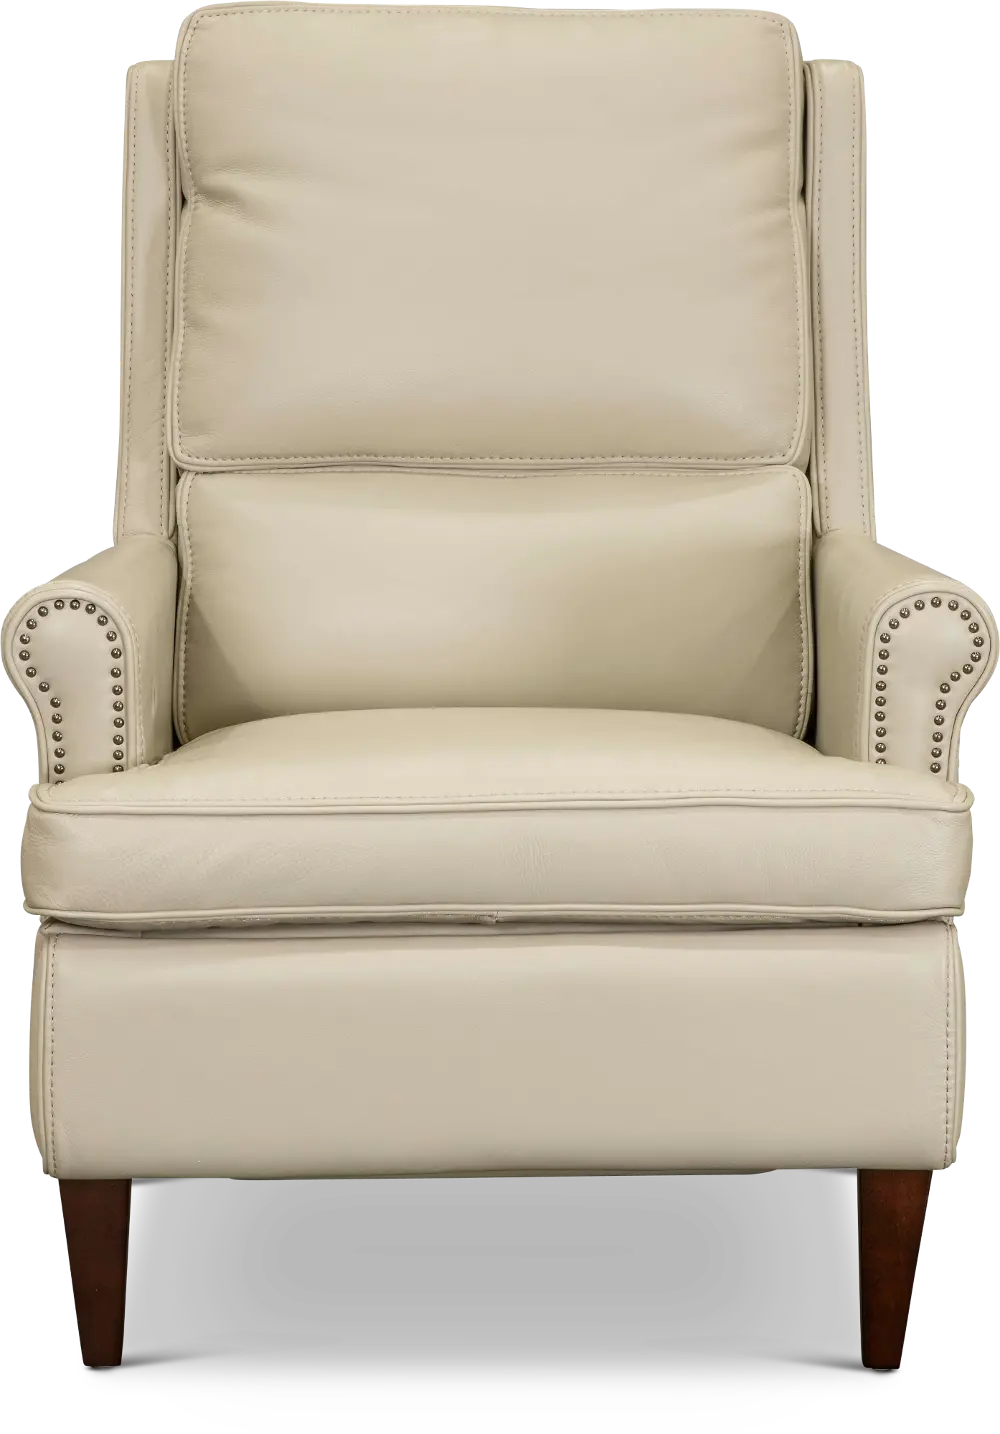 Traditional Cream Leather Reclining Chair - Coastal-1